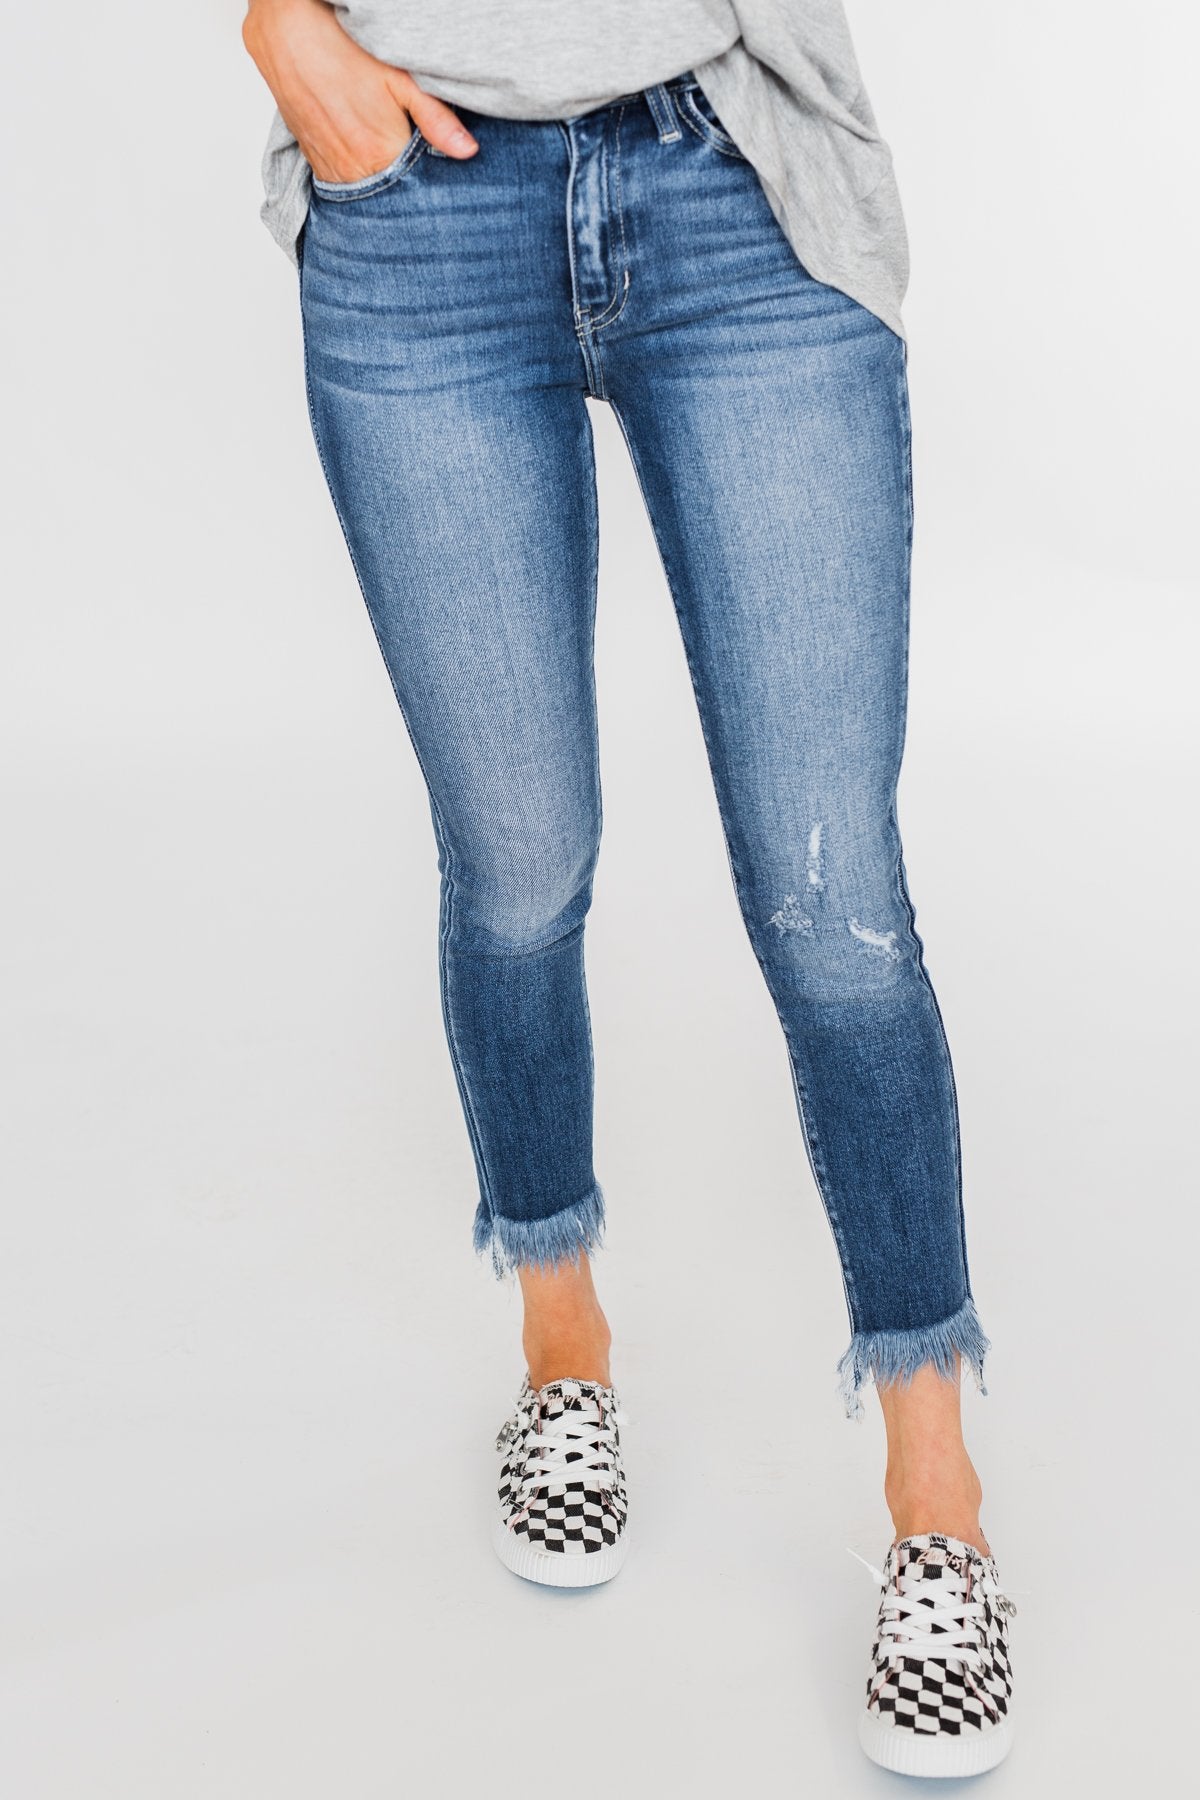 KanCan Raw Hem Skinny Jeans- Heather Wash – The Pulse Boutique